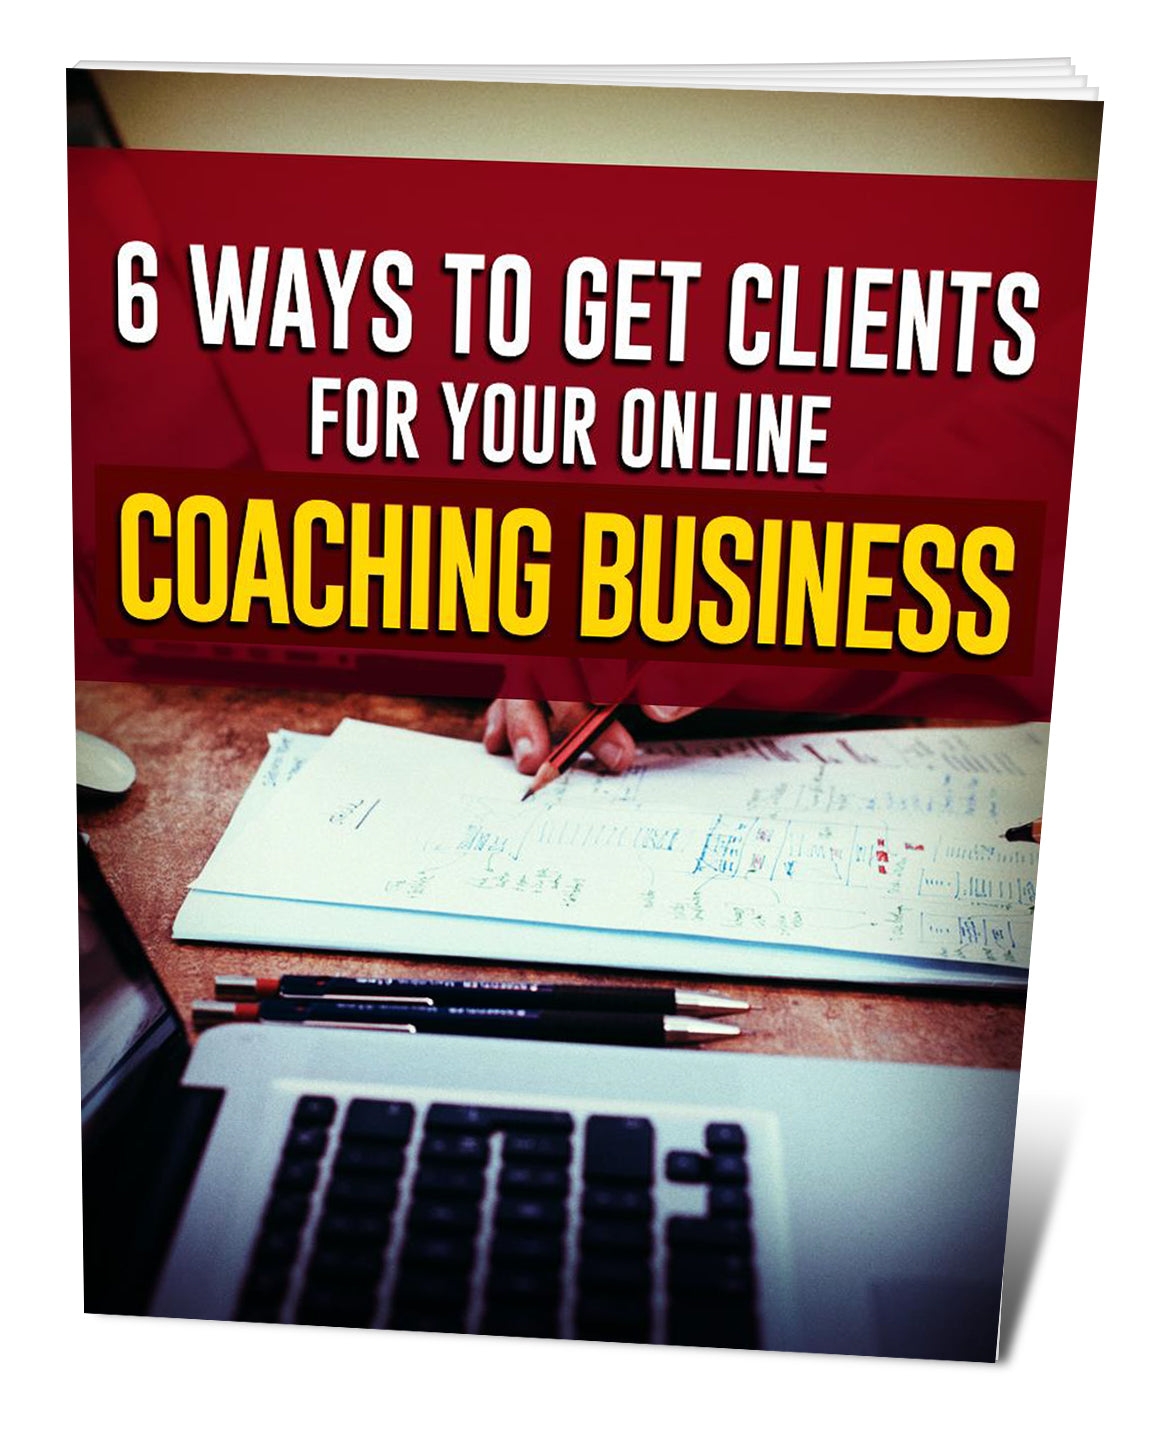 6 Ways To Get Clients For Your Online Coaching Business